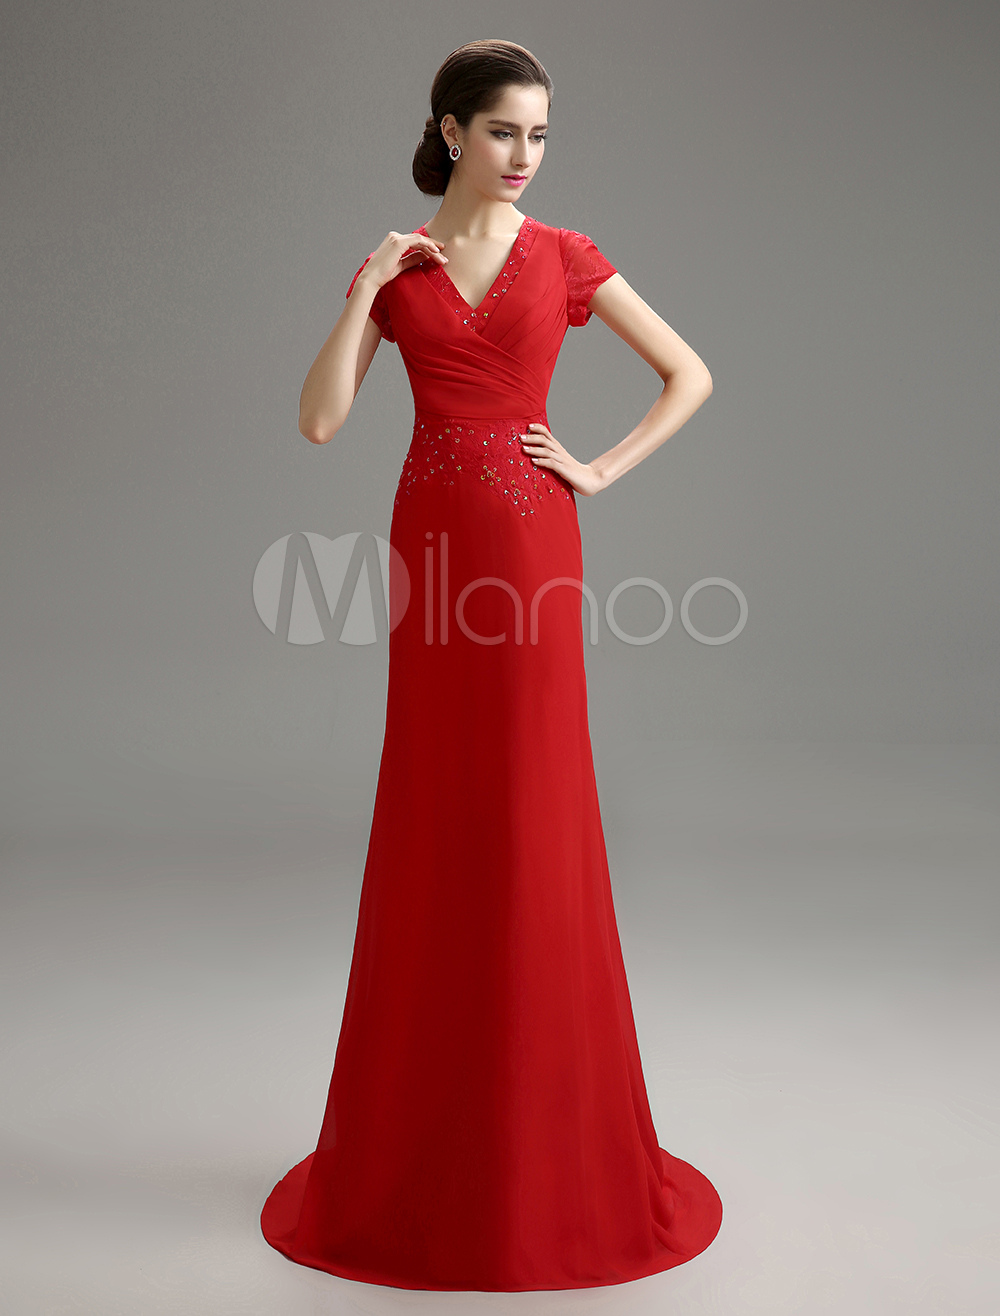 Red V-Neck Lace Chiffon Mother of the Bride Dress (Wedding) photo